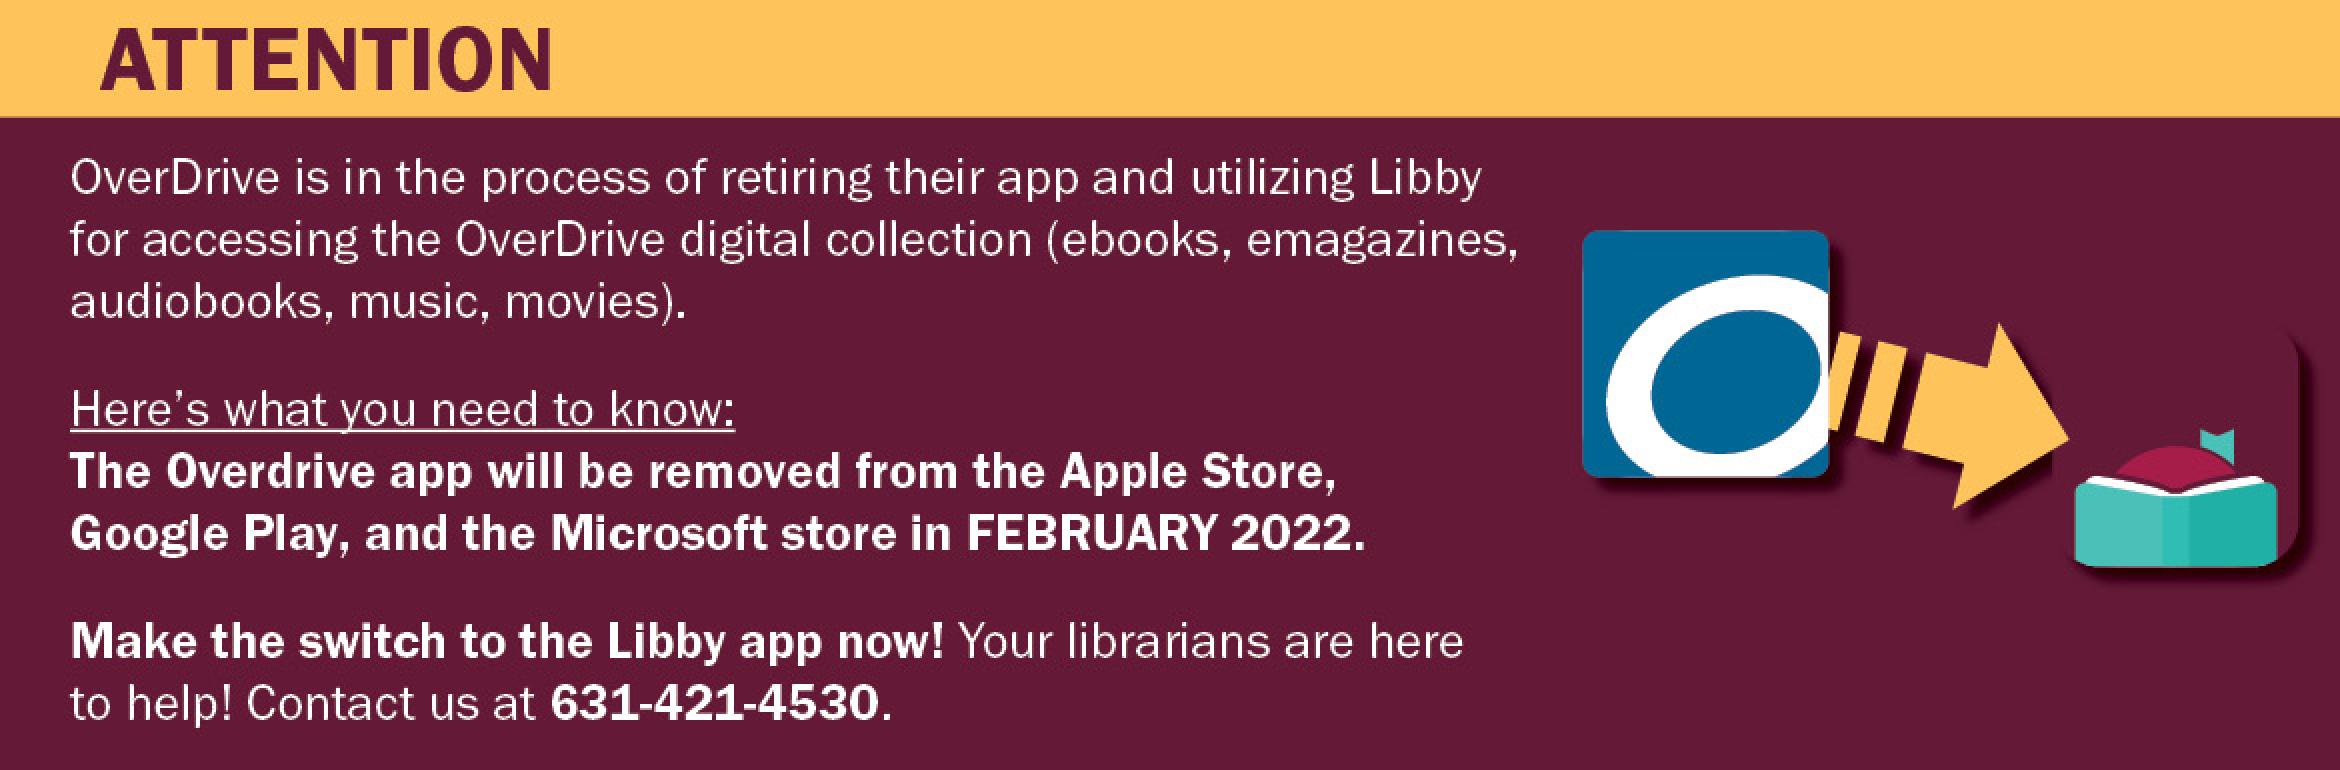 Attention. OverDrive is in the process of retiring their app and utilizing Libby for accessing the OverDrive digital collection (ebooks, emagazines, audiobooks, music, movies). Here’s what you need to know: The Overdrive app will be removed from the Apple Store, Google Play, and the Microsoft store in FEBRUARY 2022. Make the switch to the Libby app now! Your librarians are here to help! Contact us at 631-421-4530.